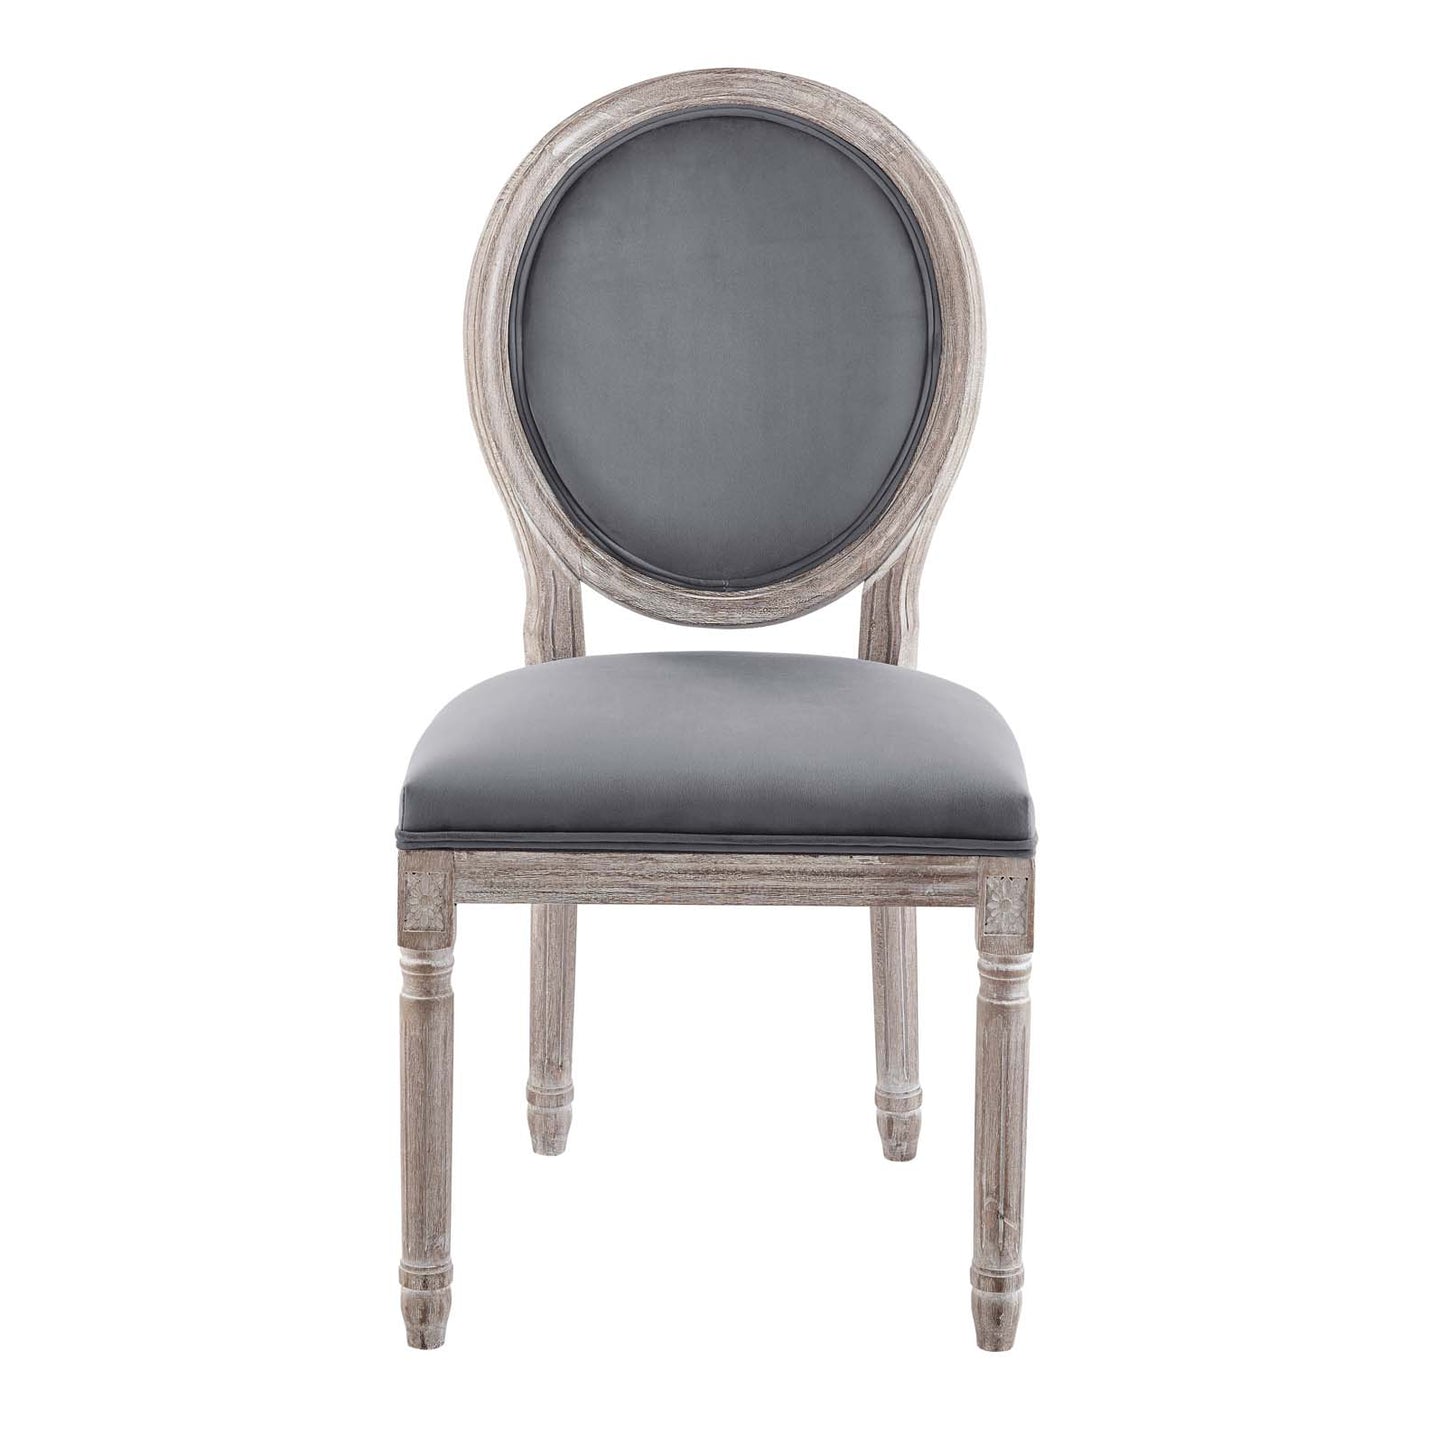 Emanate Vintage French Performance Velvet Dining Side Chair Natural Gray EEI-4668-NAT-GRY